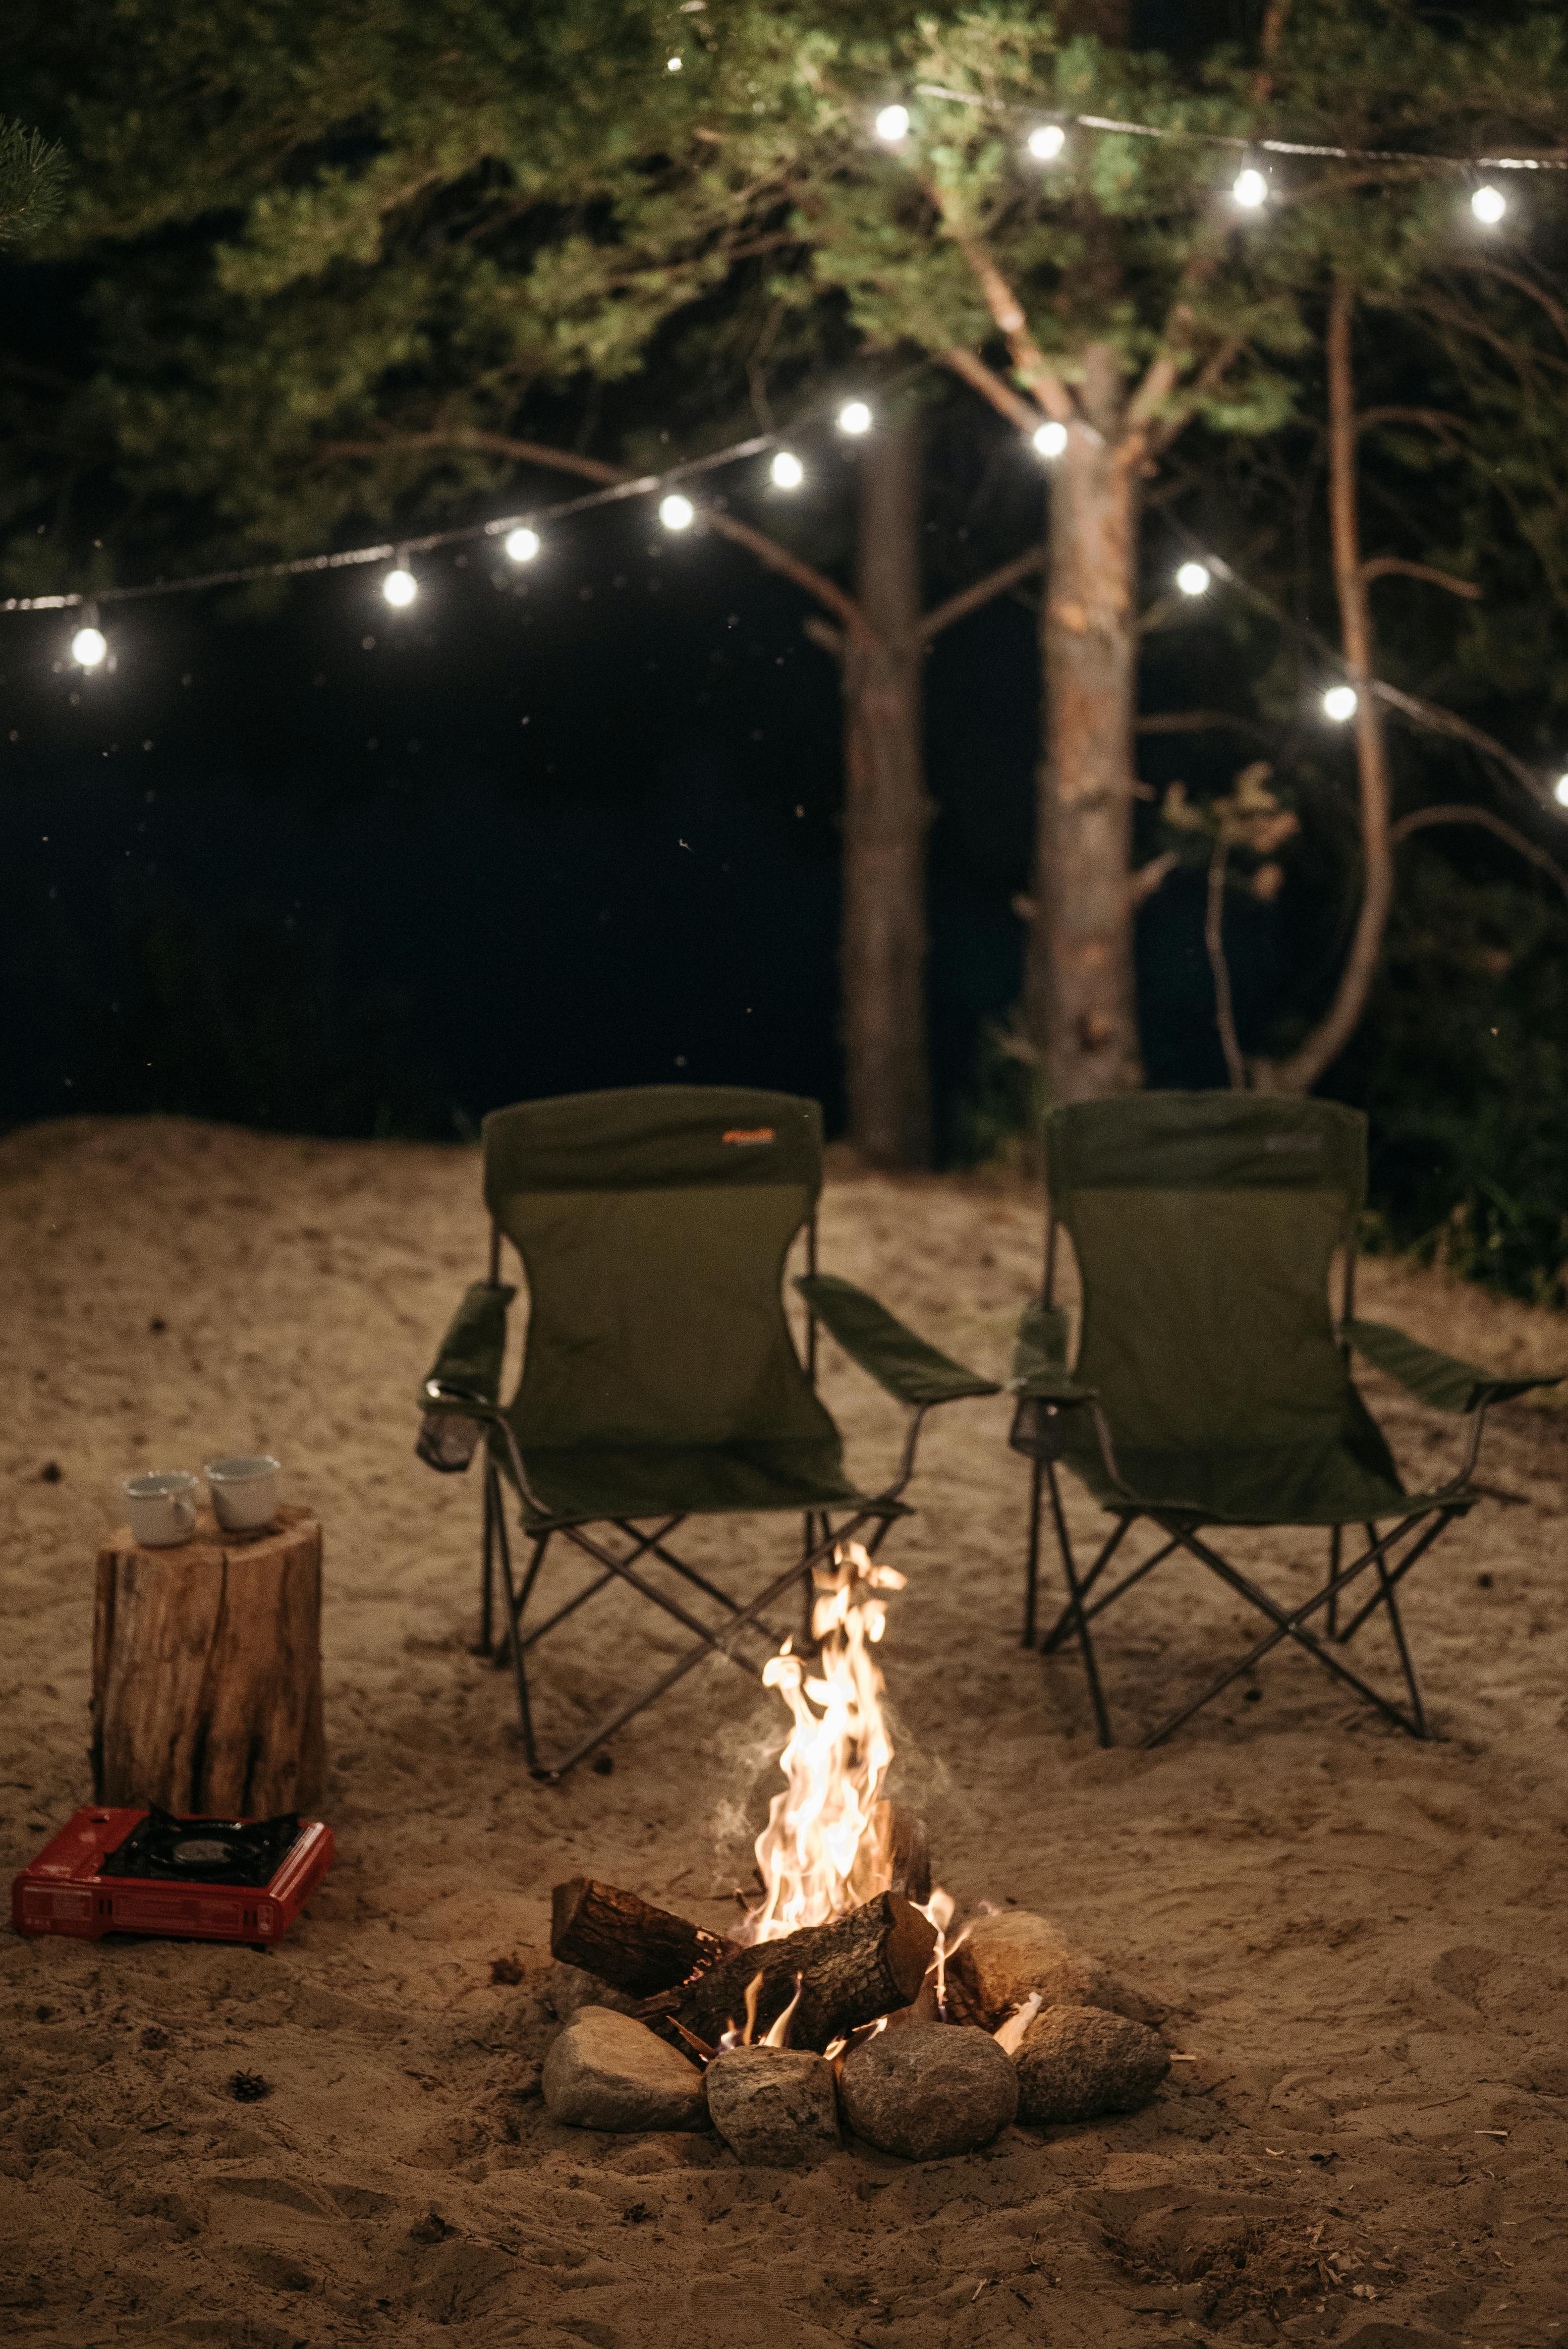 Portable chairs | Source: Pexels